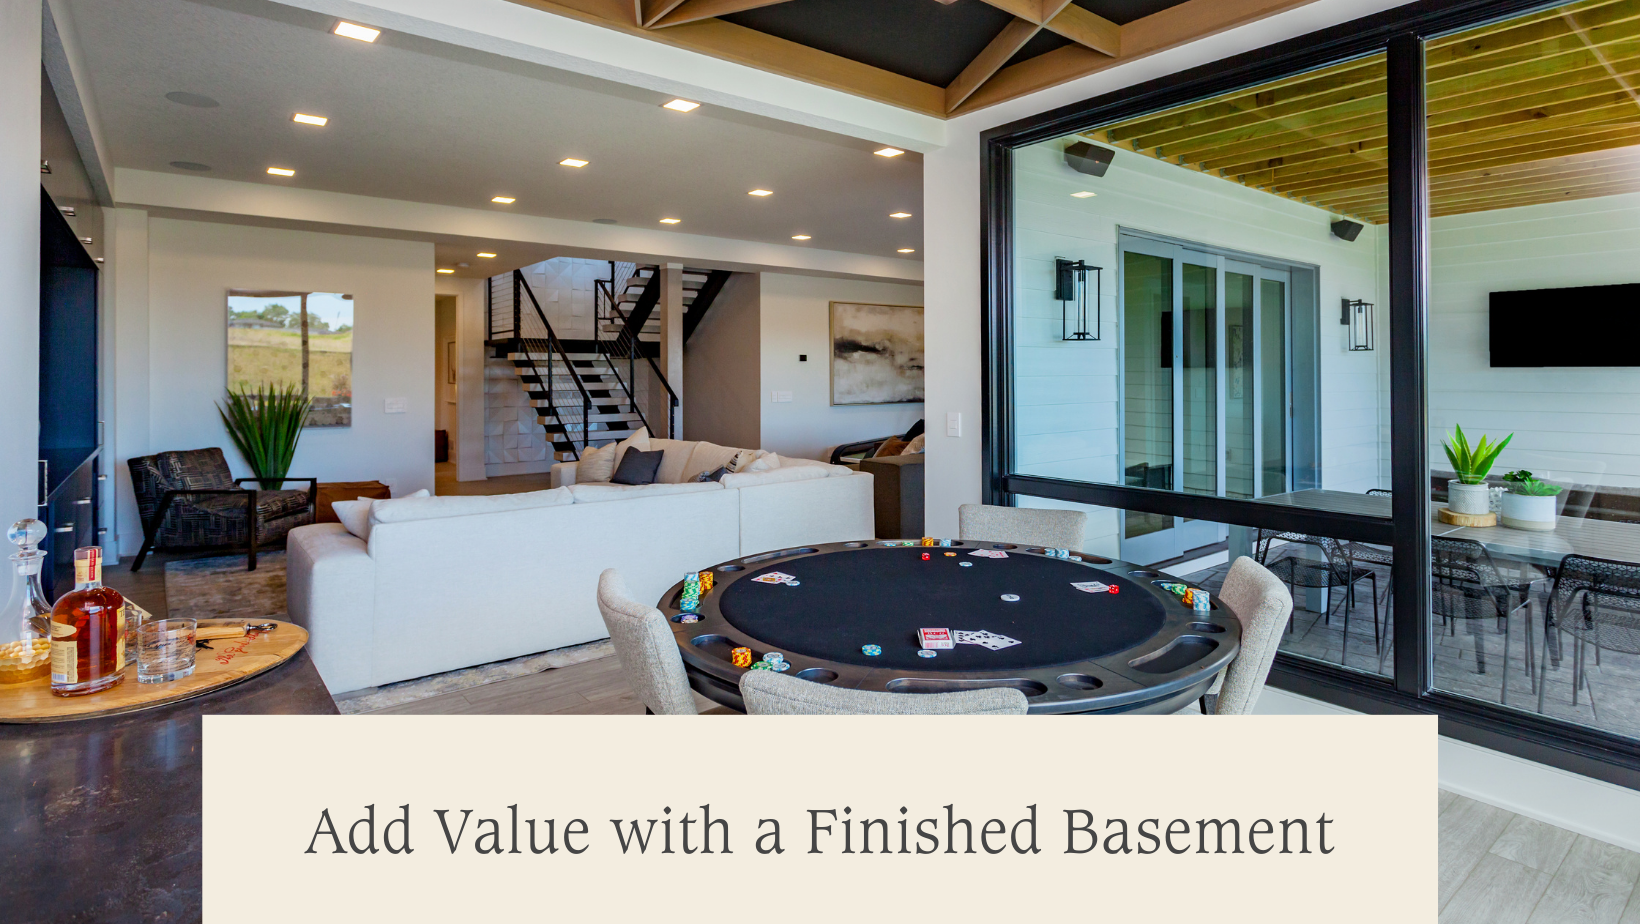 Add Value with a Finished Basement